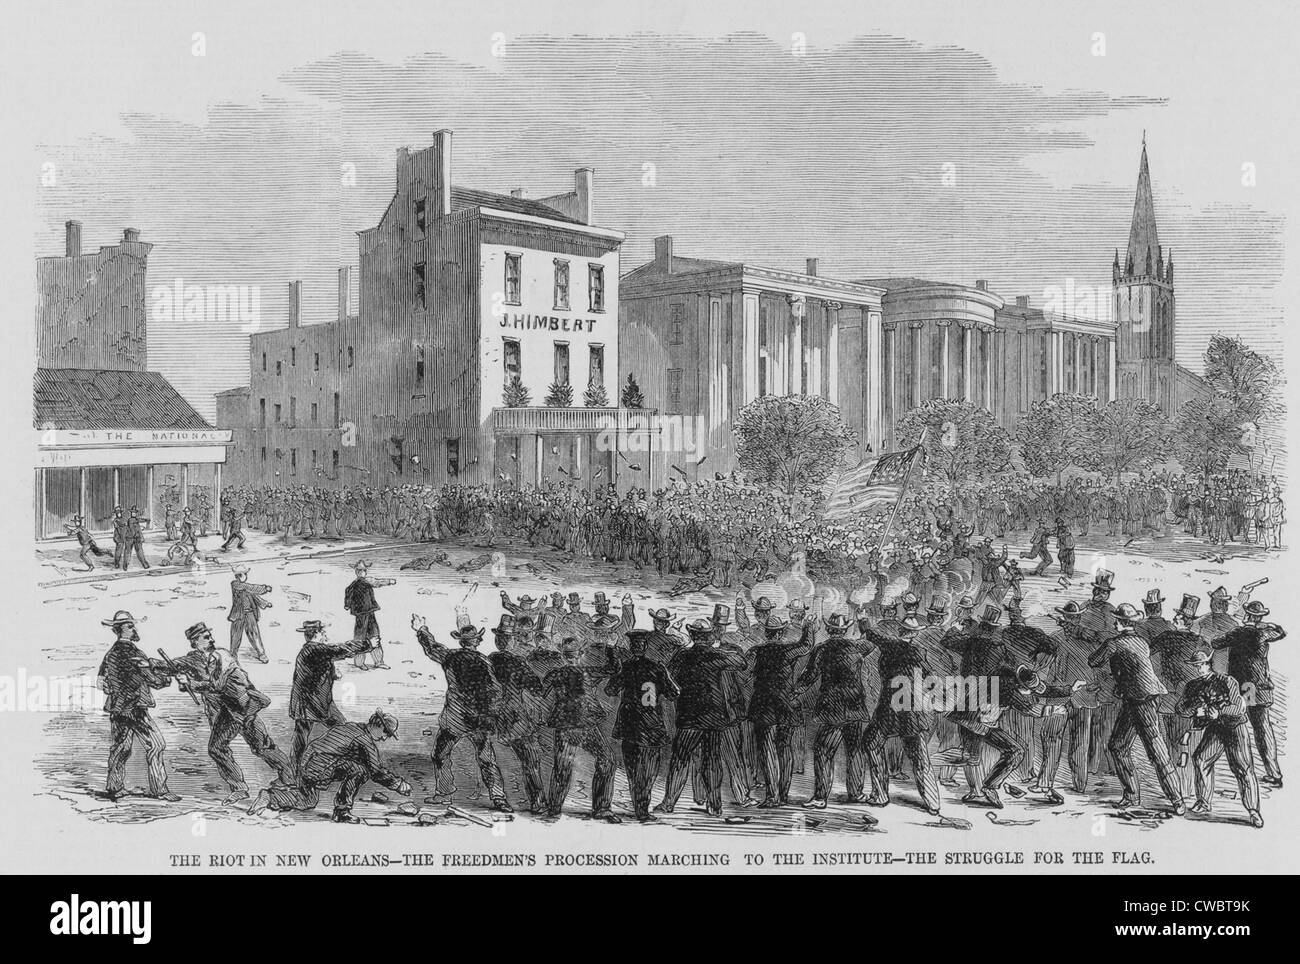 1866 Race Riot in New Orleans was one of the first large scale riots against Freedman in the Reconstruction Era (1866-1876). Stock Photo